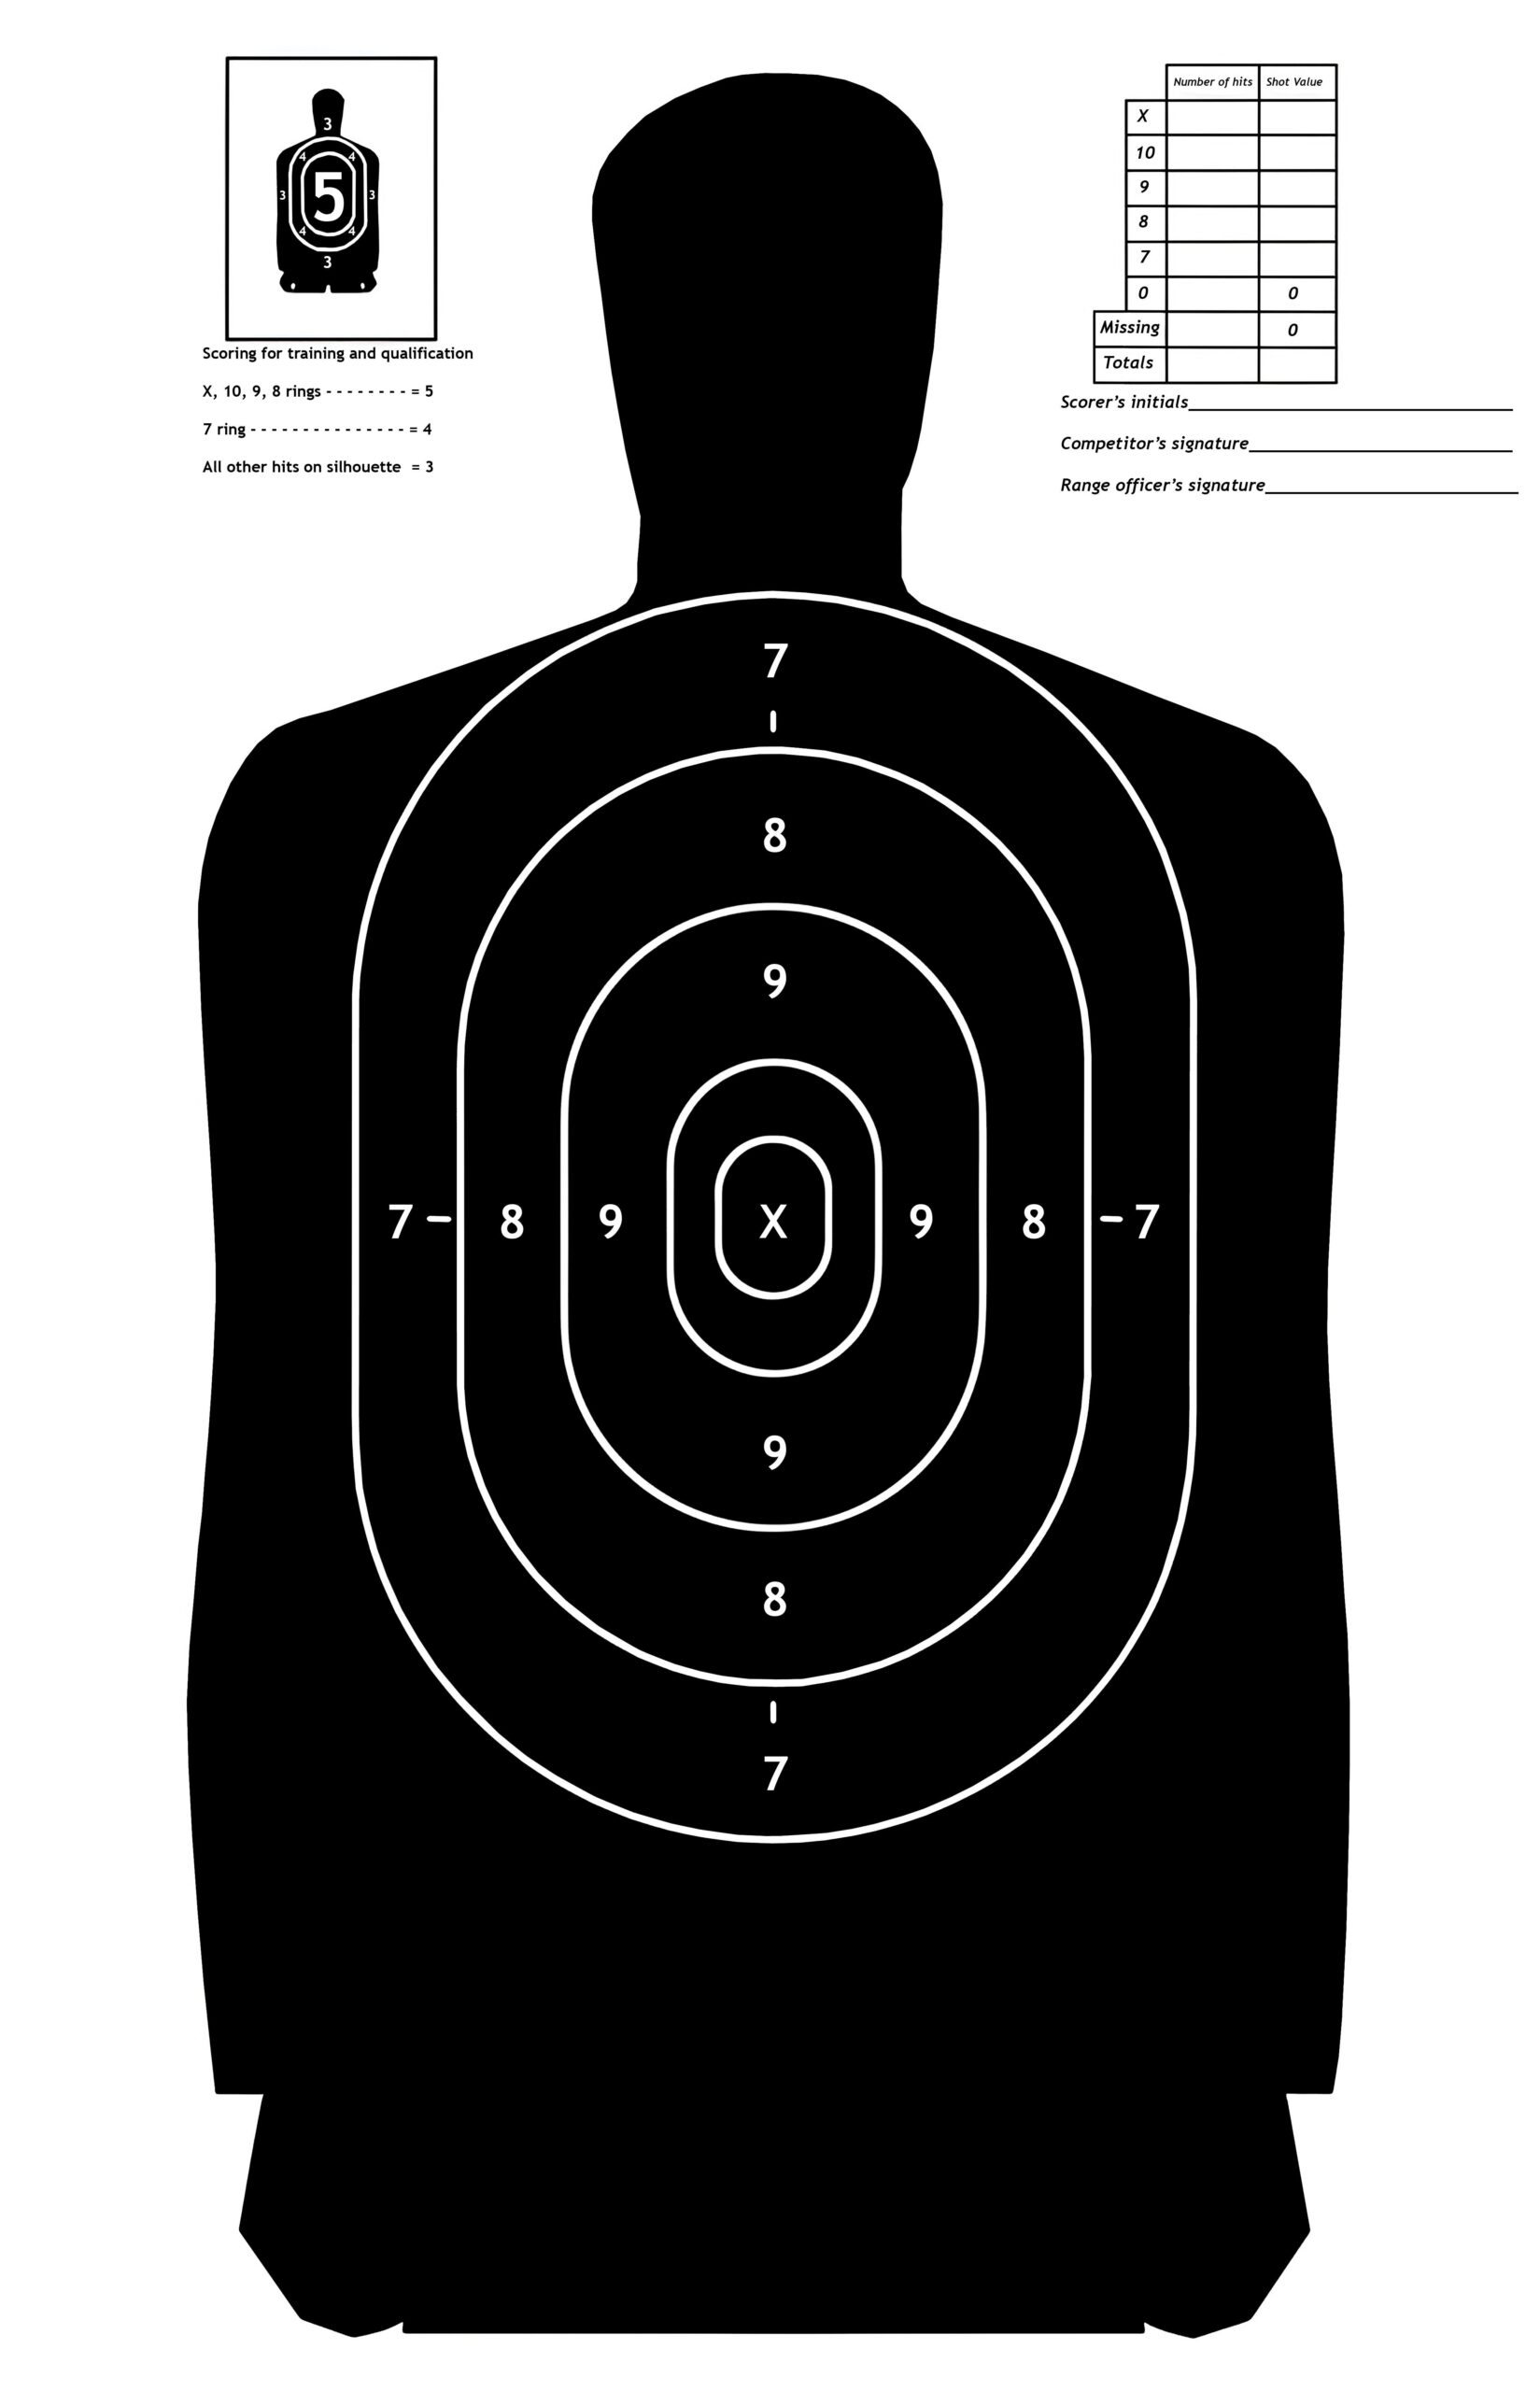 For Anyone Who Needs A Printable Target Here s One I Made From Low Res Photo Adobe Ps Cs6 R airguns